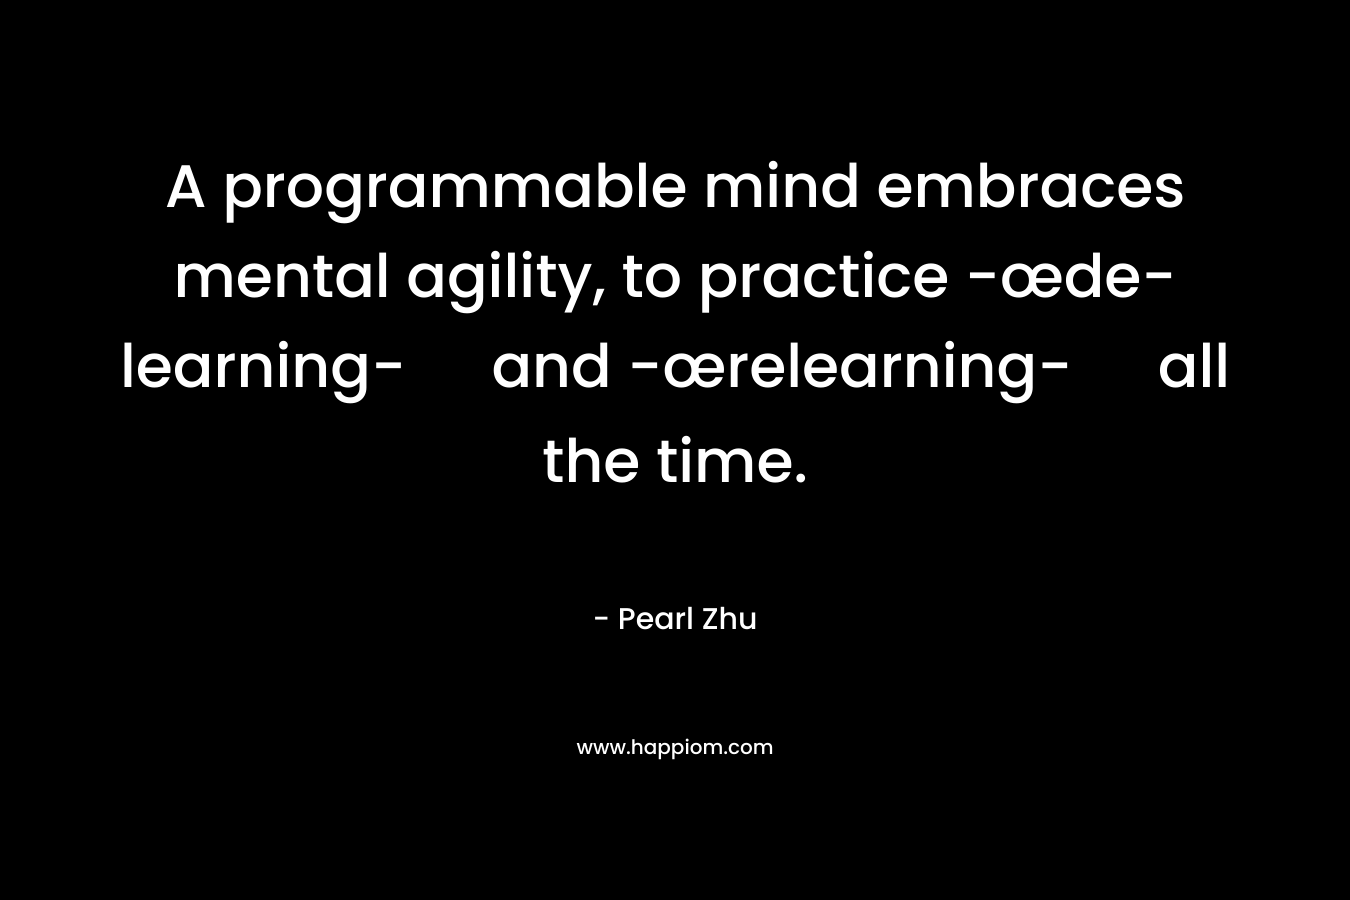 A programmable mind embraces mental agility, to practice -œde-learning- and -œrelearning- all the time. – Pearl Zhu